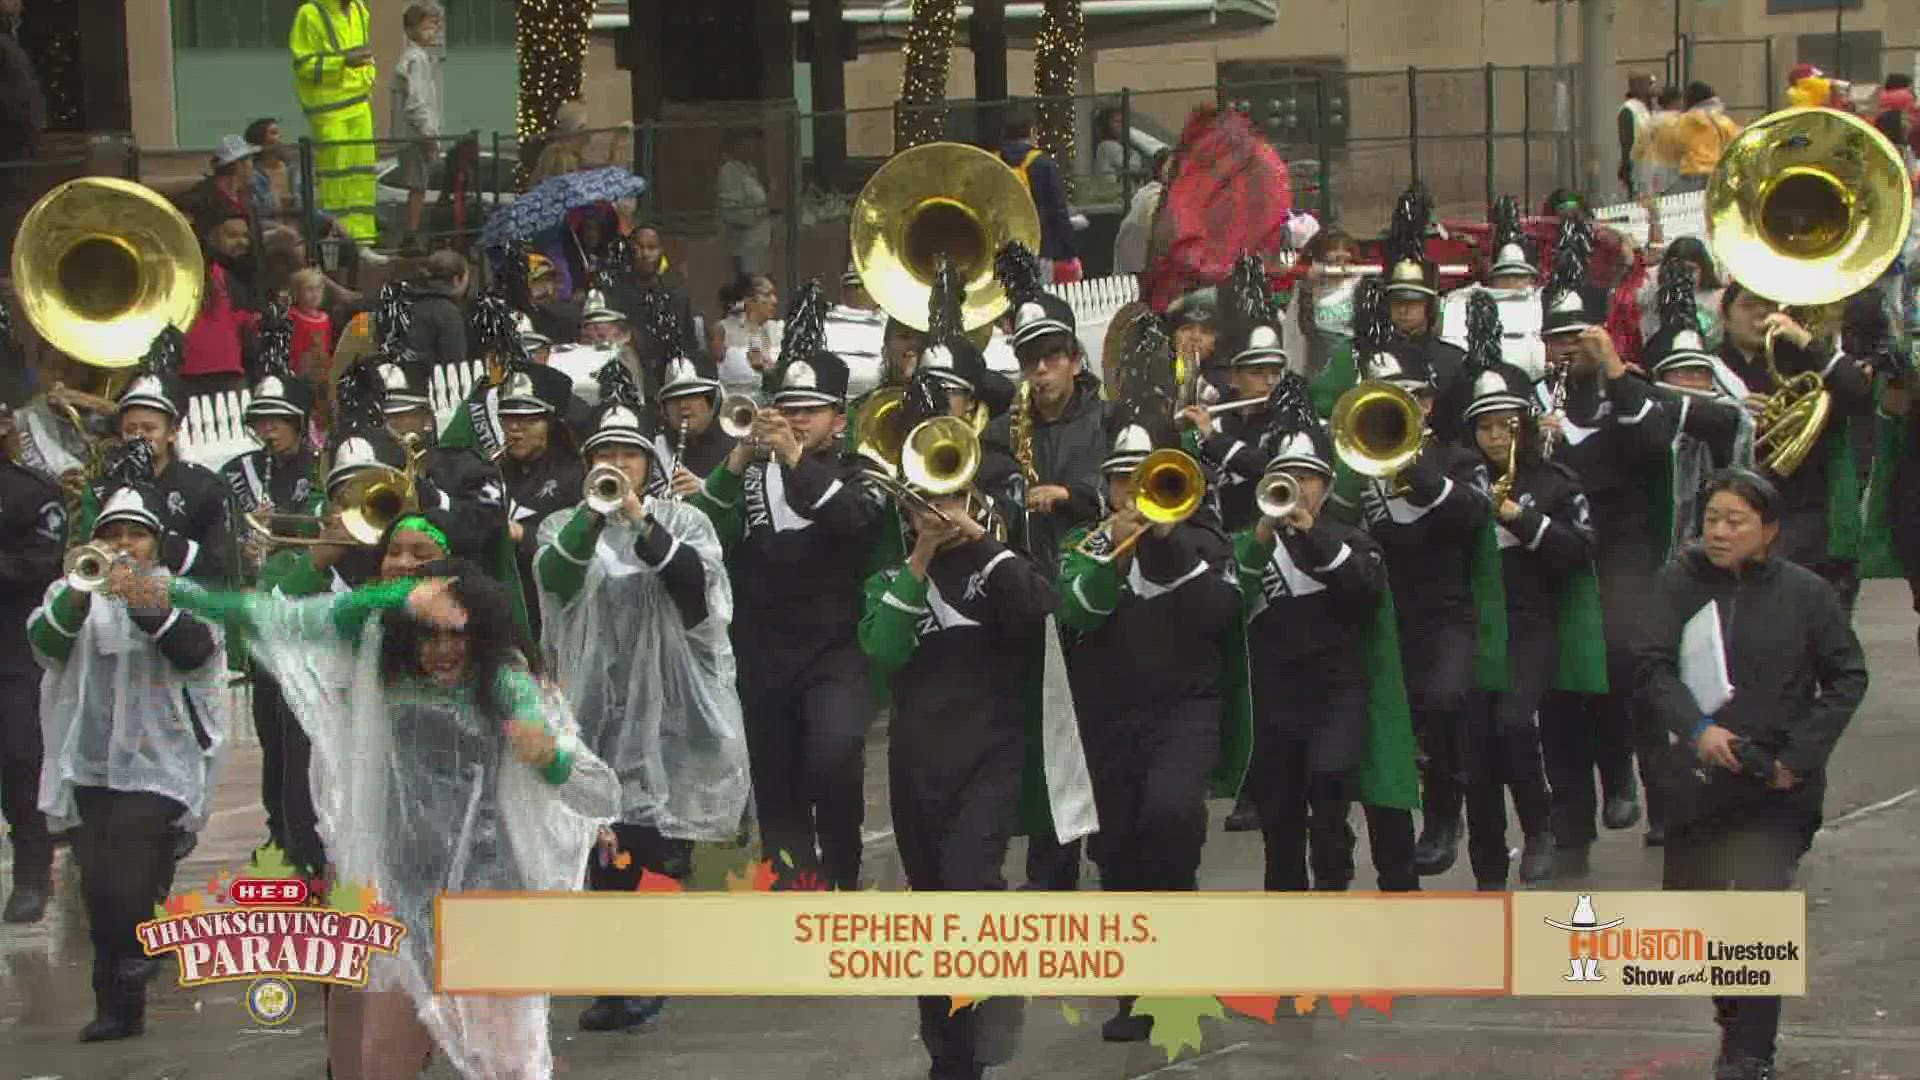 Stephen F. Austin HS Sonic Boom Band performed during the H-E-B Thanksgiving Day Parade Thursday morning in downtown Houston.